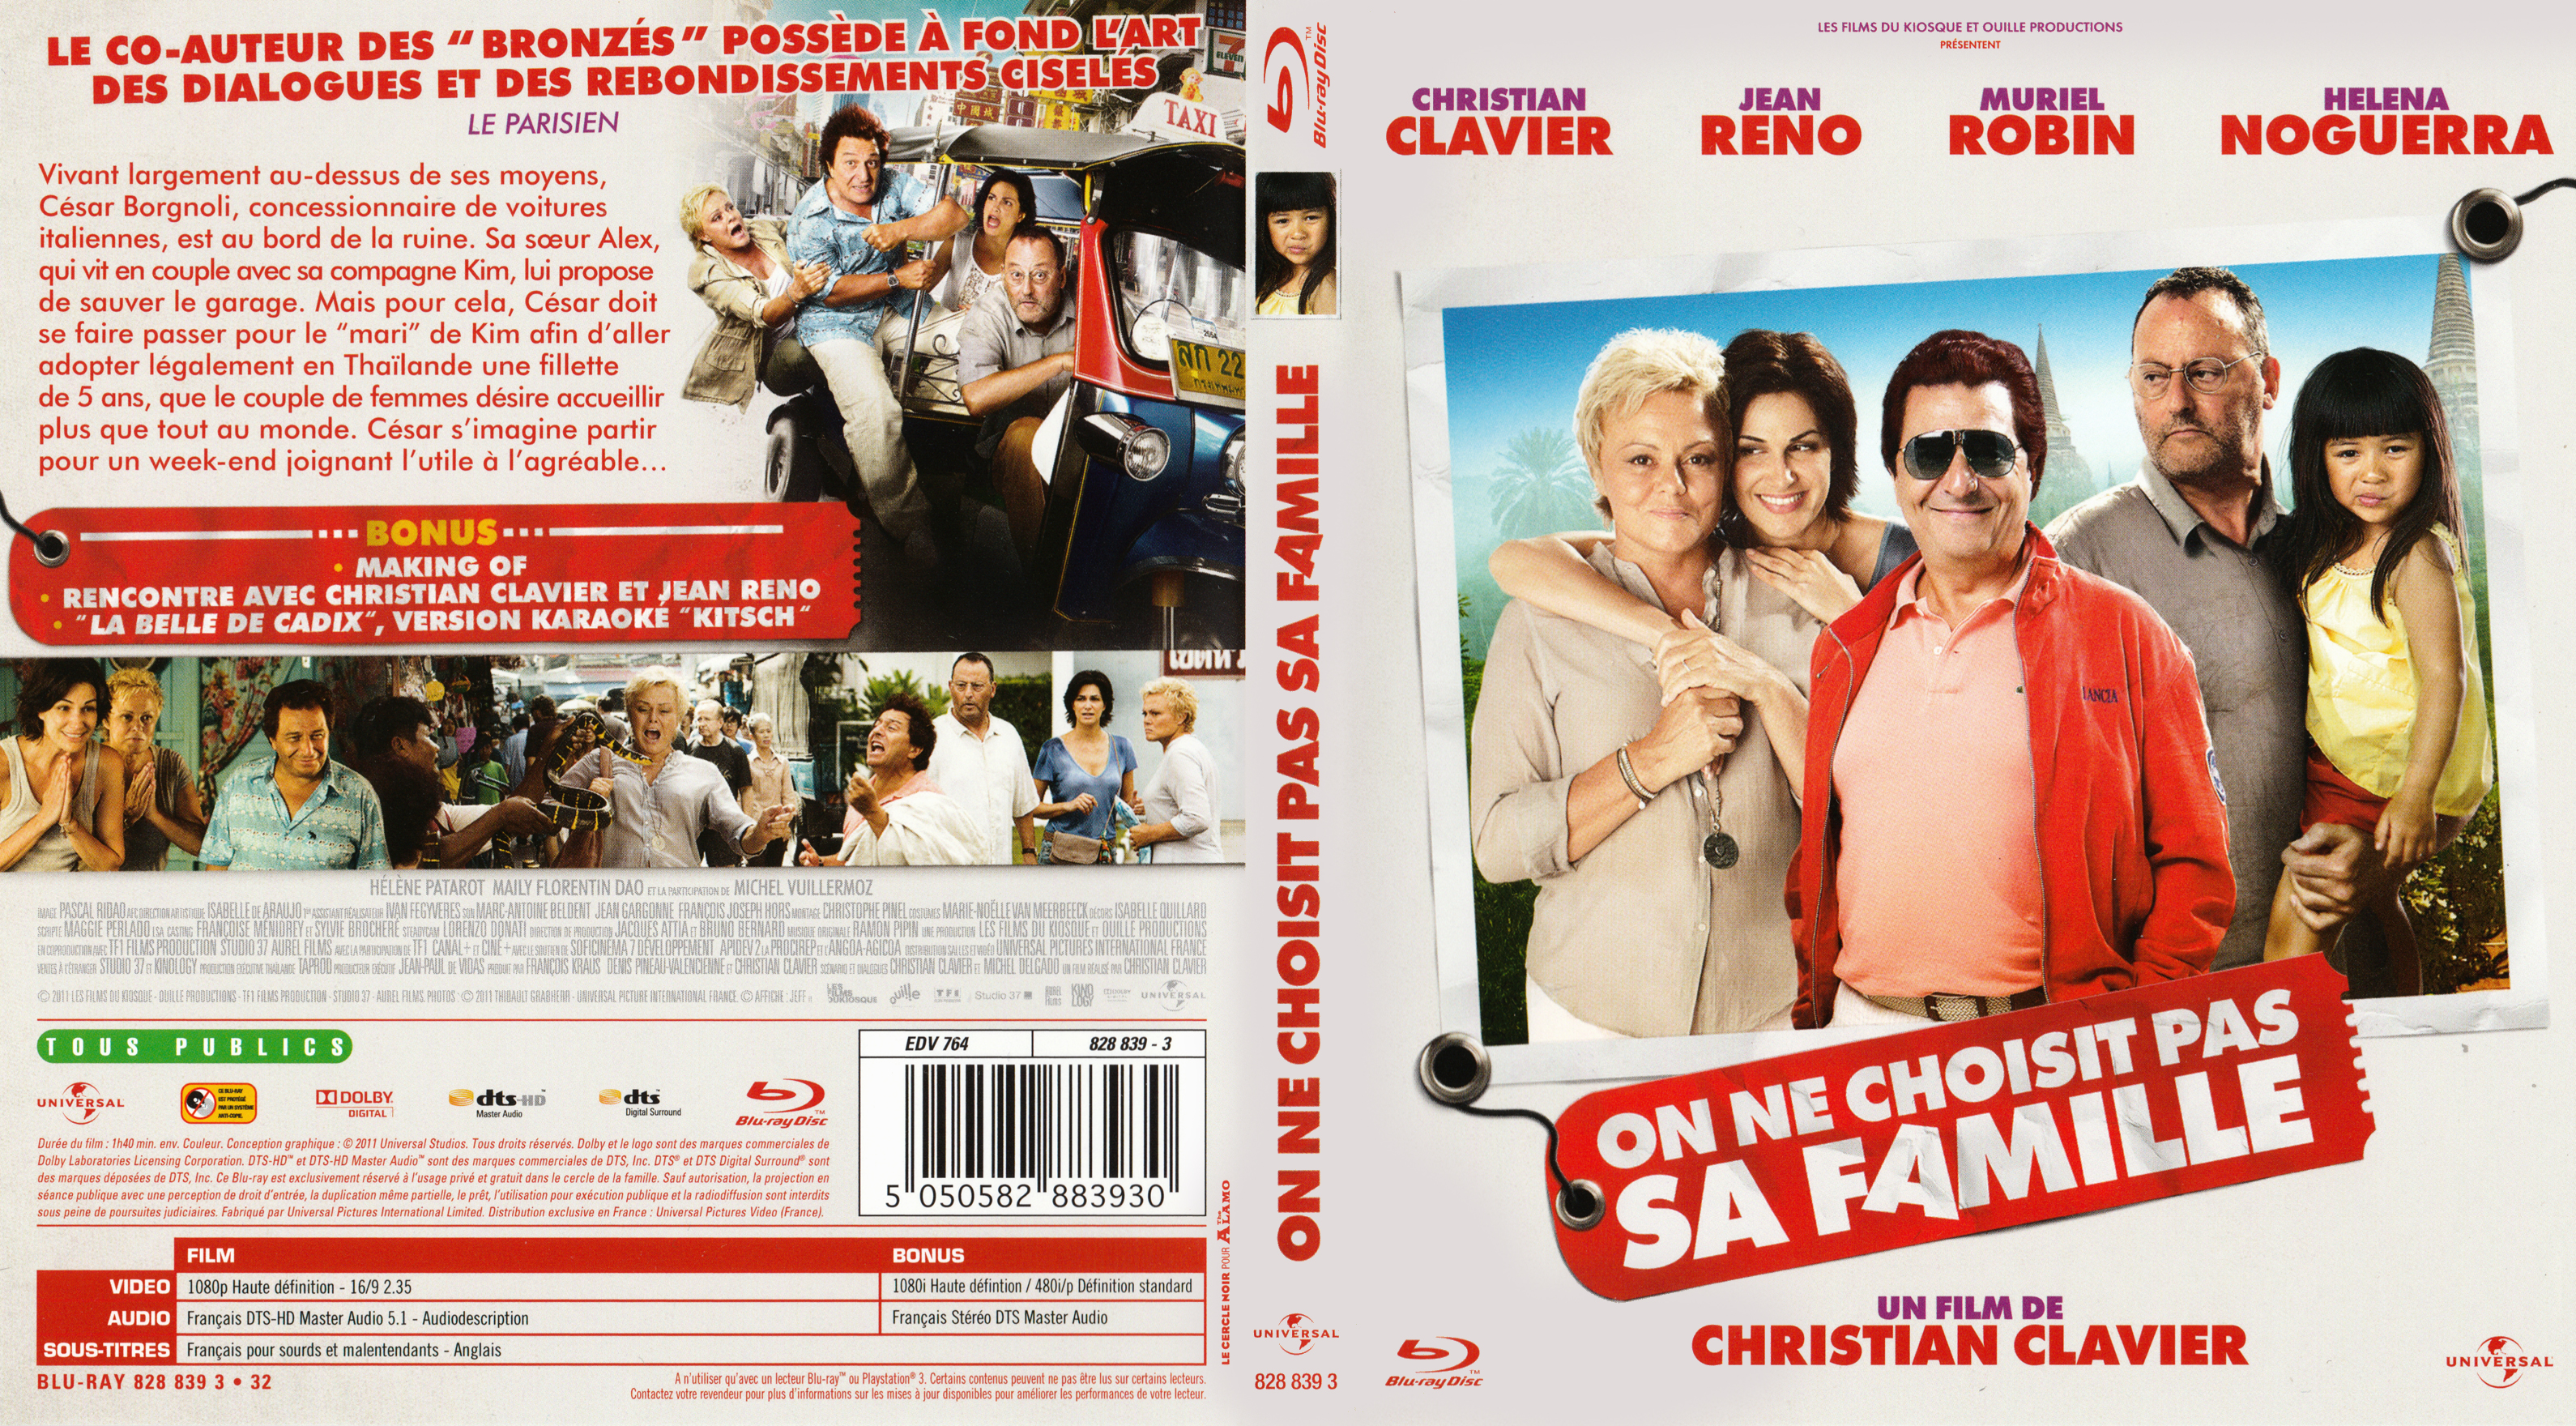 Jaquette DVD On ne choisi pas sa famille (BLU-RAY)